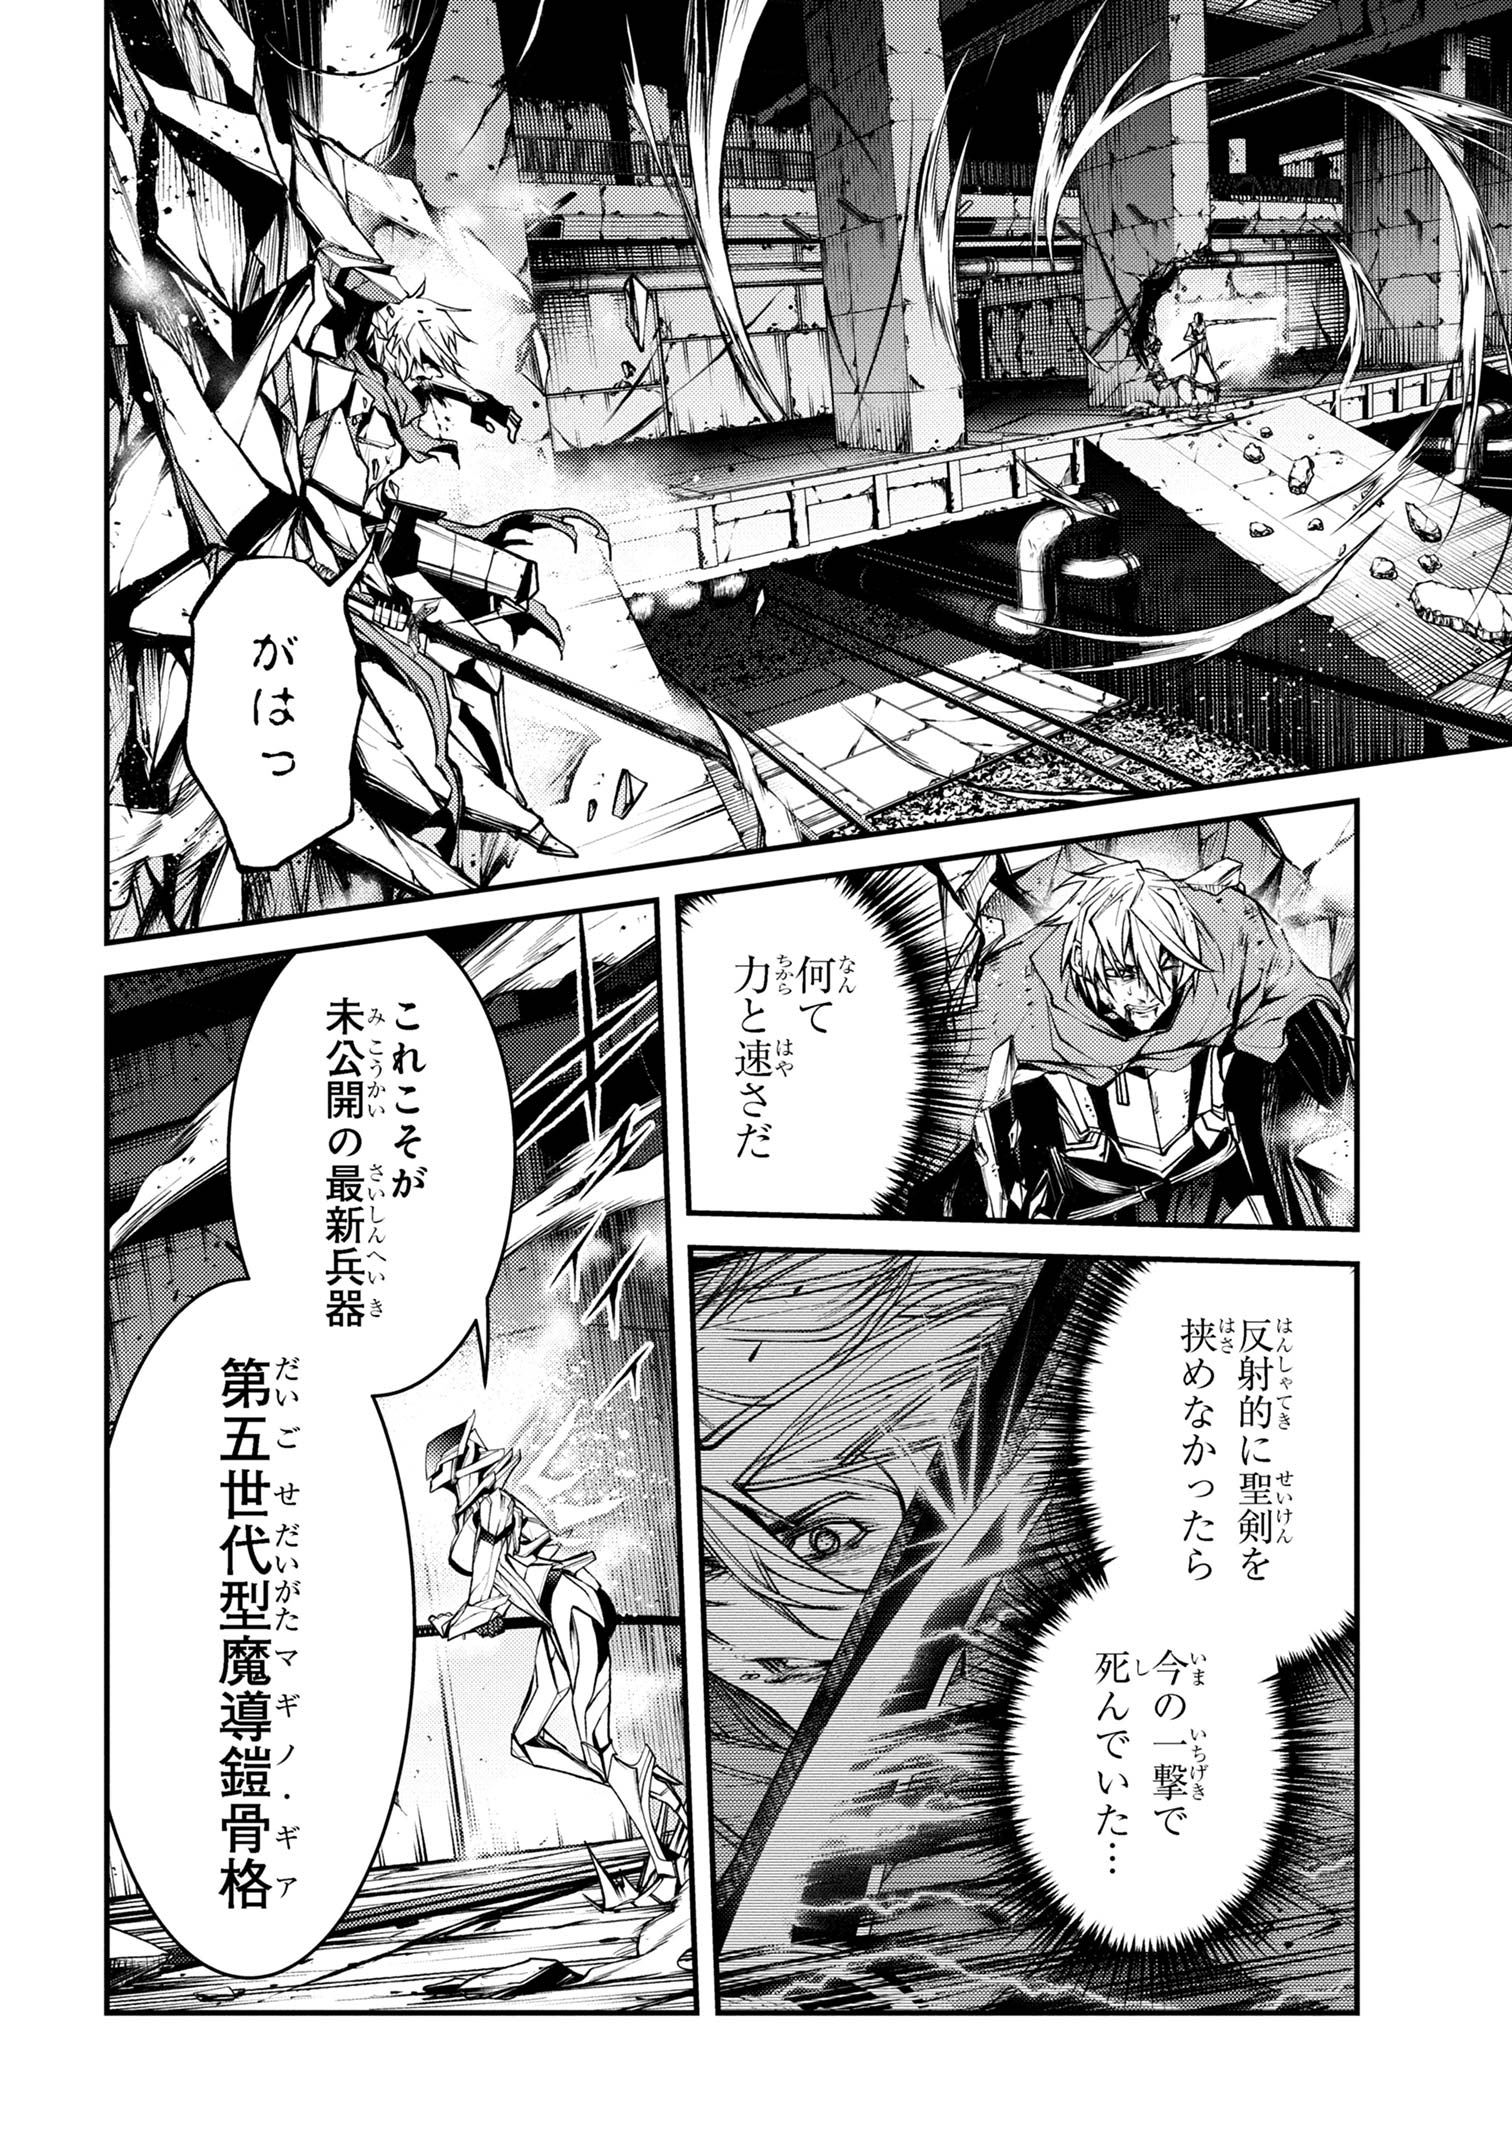 Maou 2099 - Chapter 12.1 - Page 8